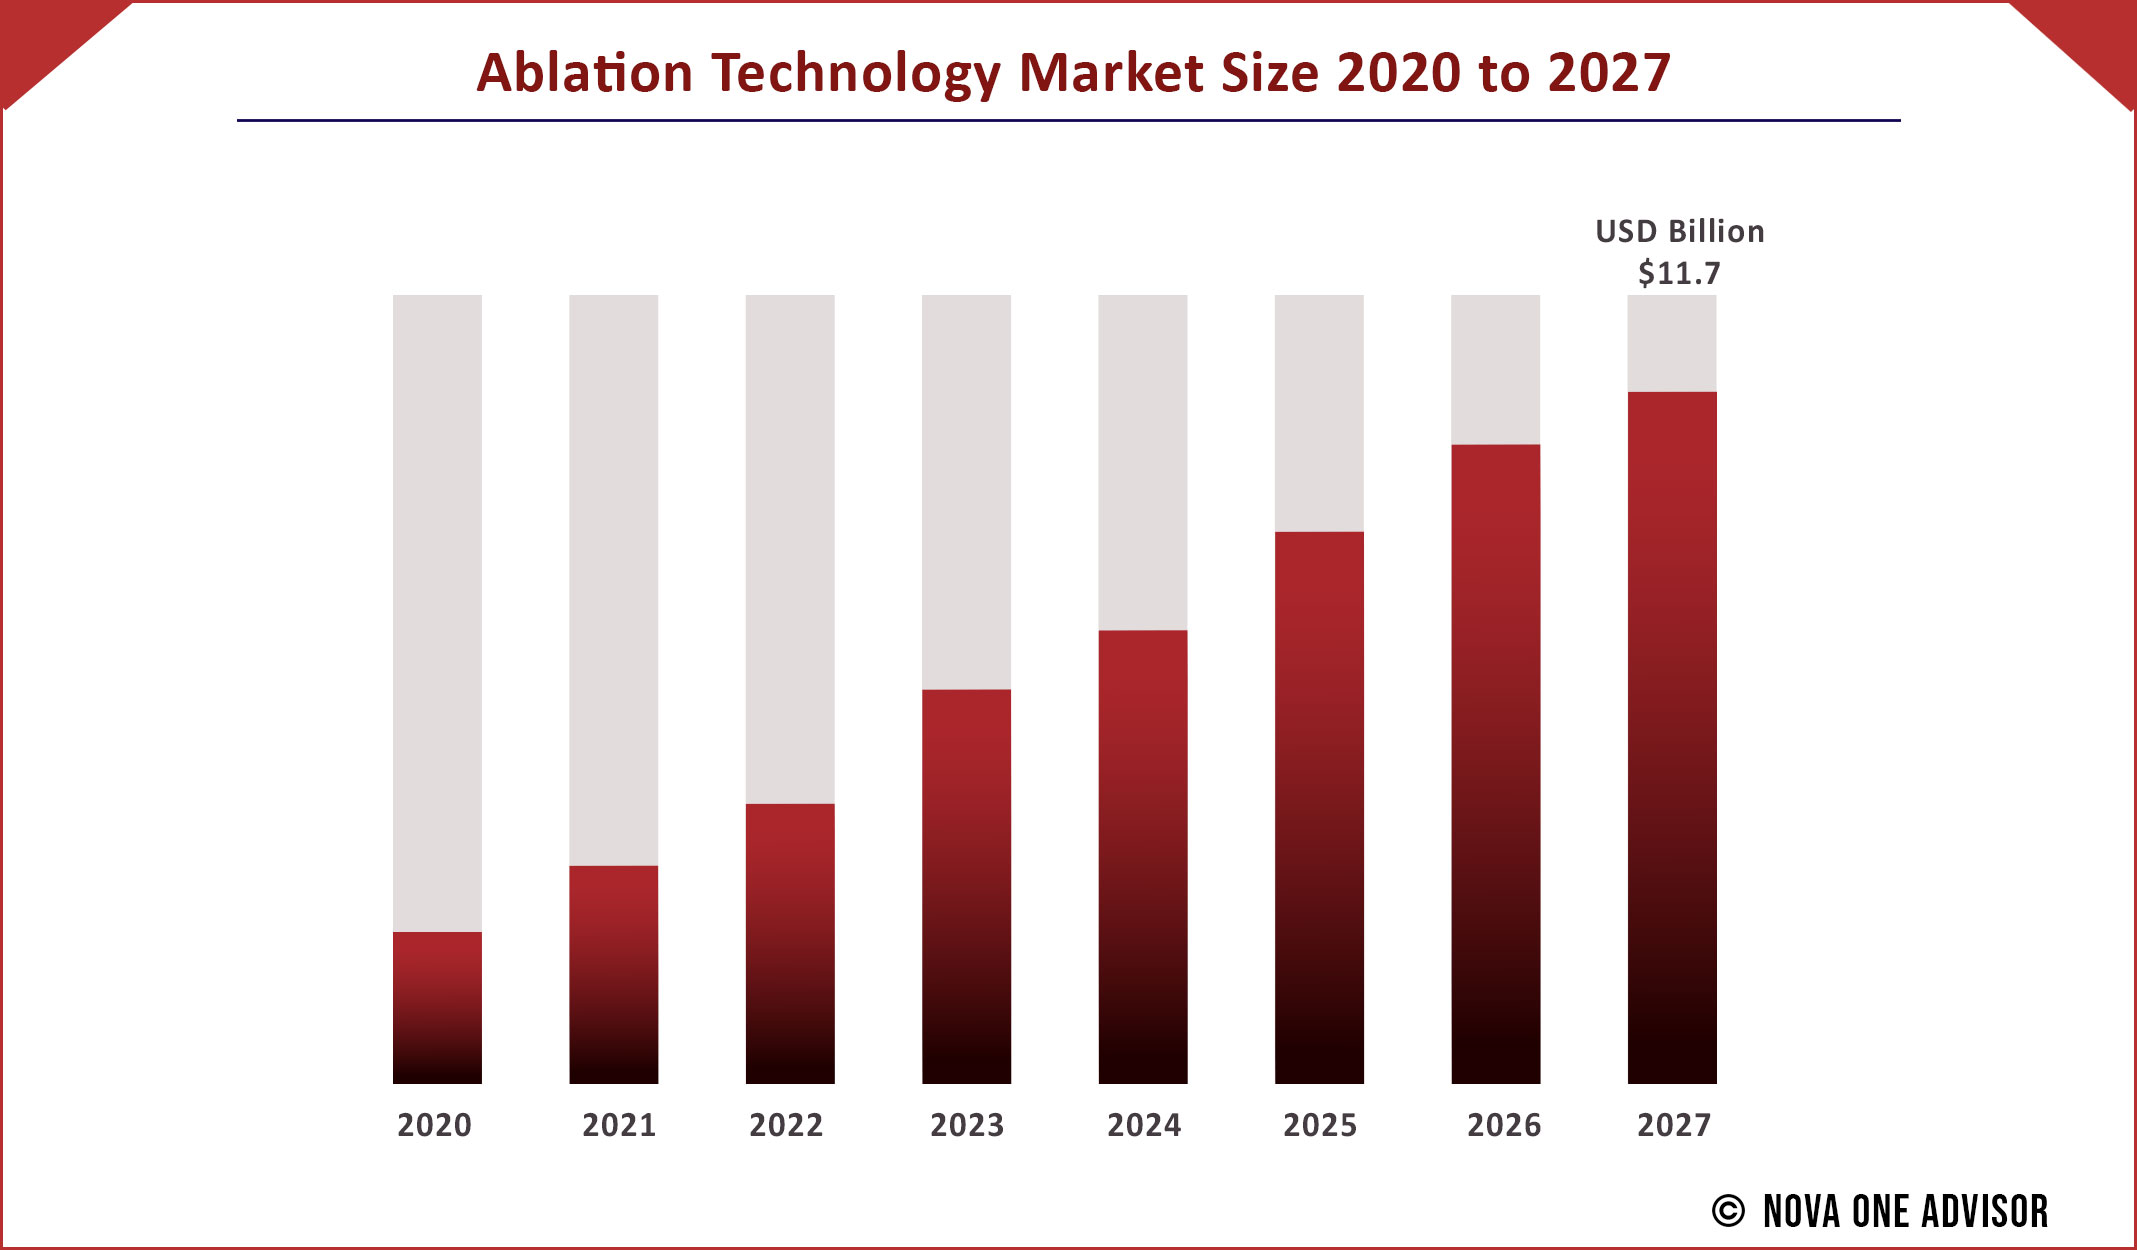 Ablation Technology Market Size 2020 to 2027